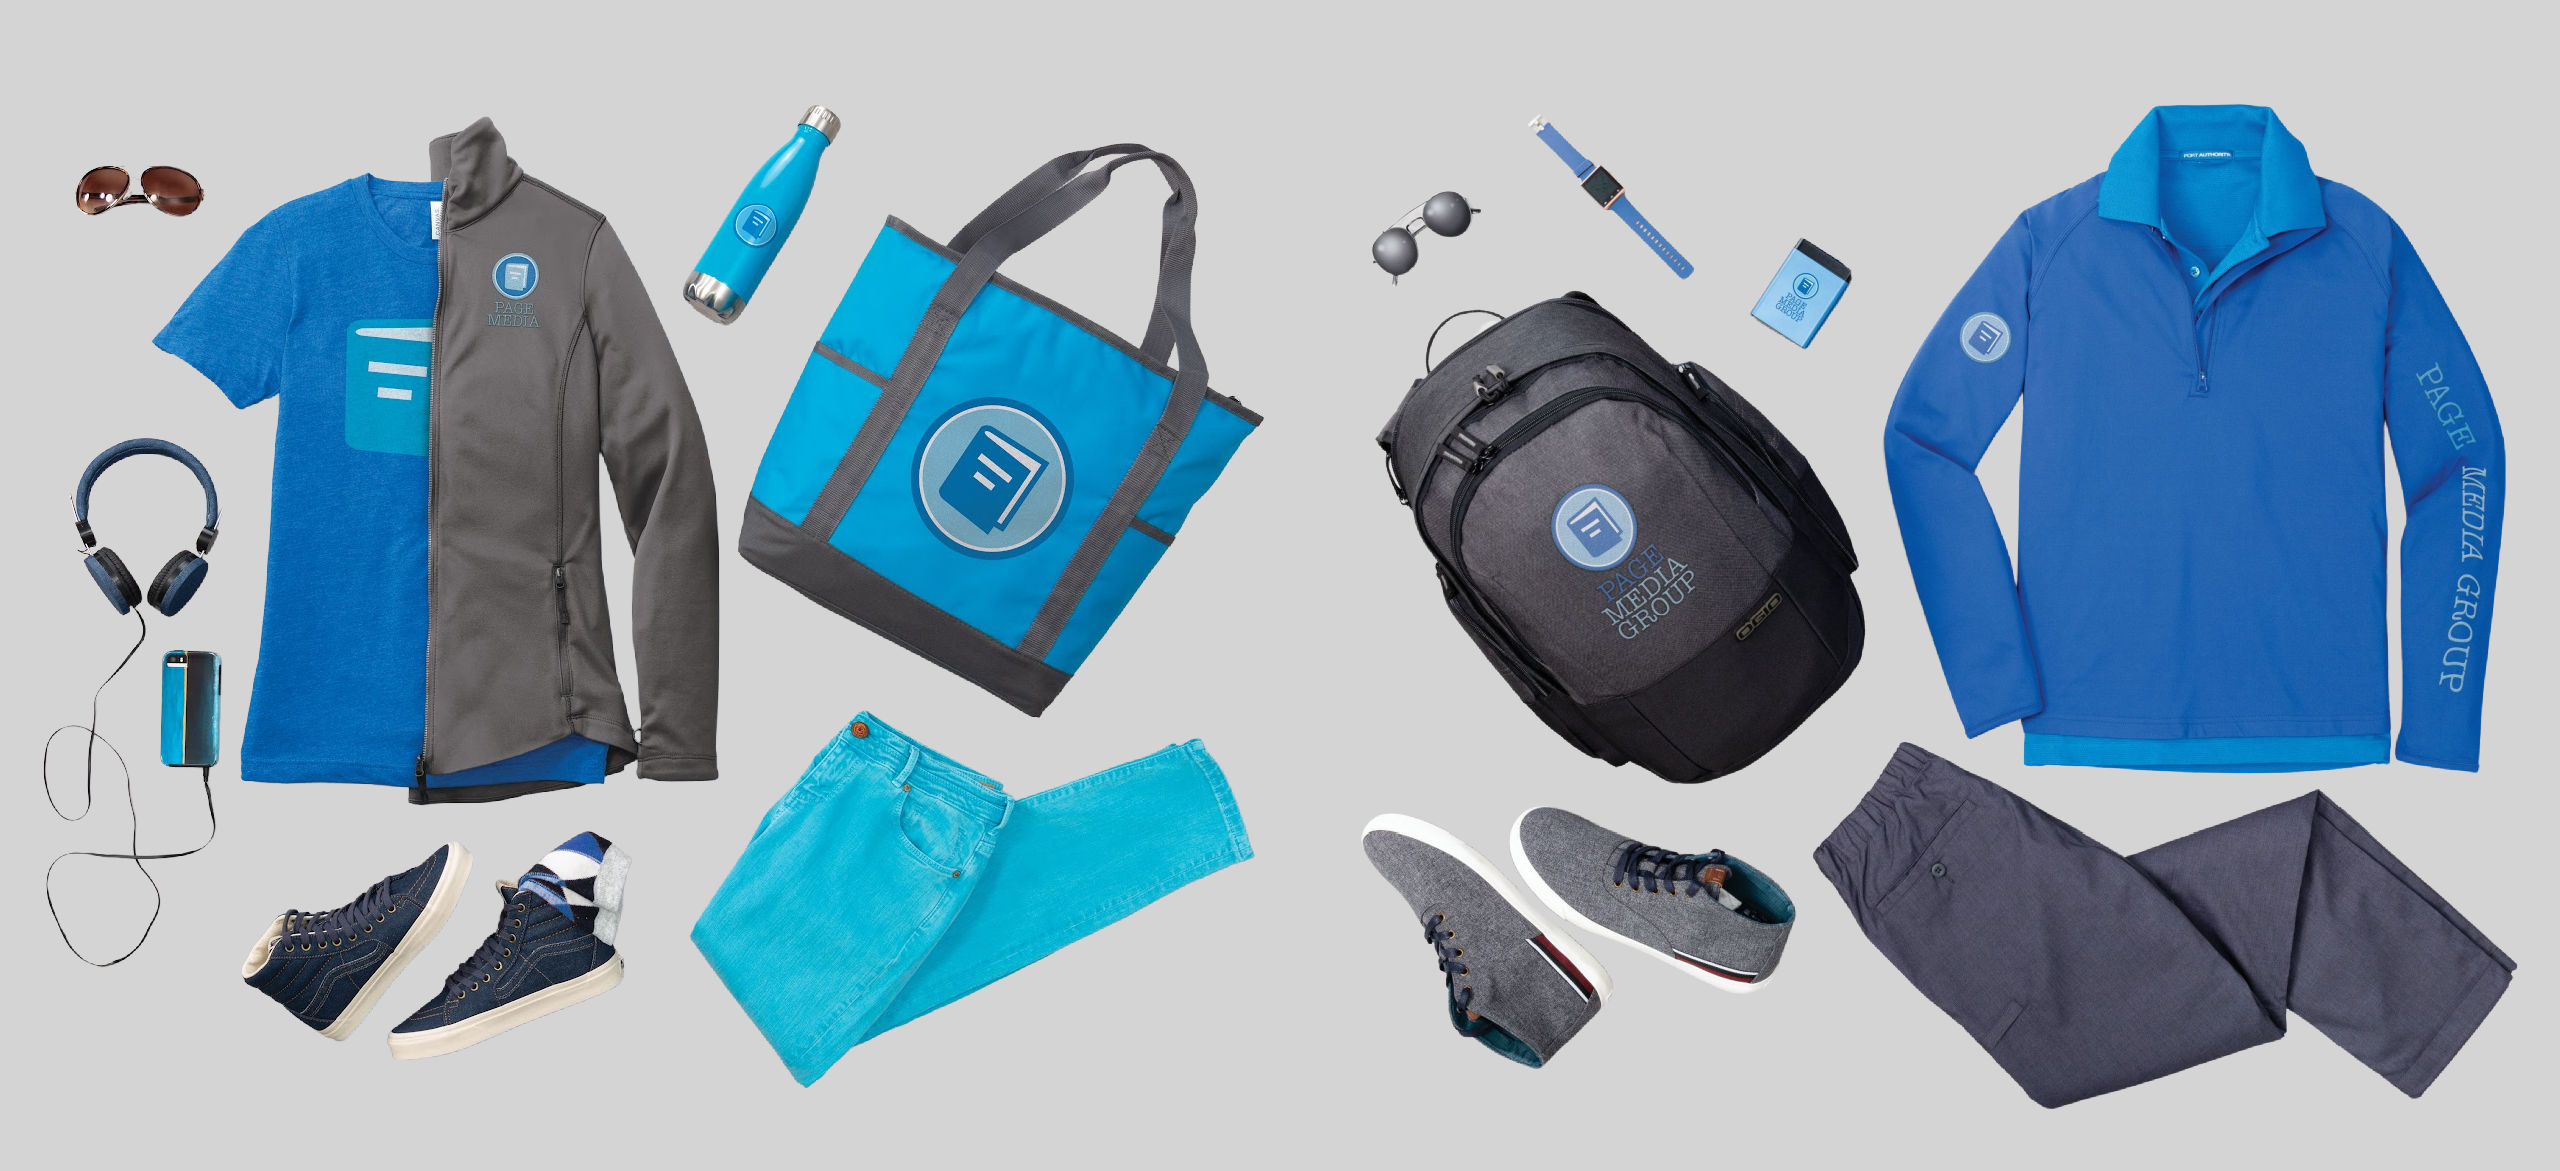 Kinetic_Promotional_Product_Services_Apparel_Casual_His_and_Her